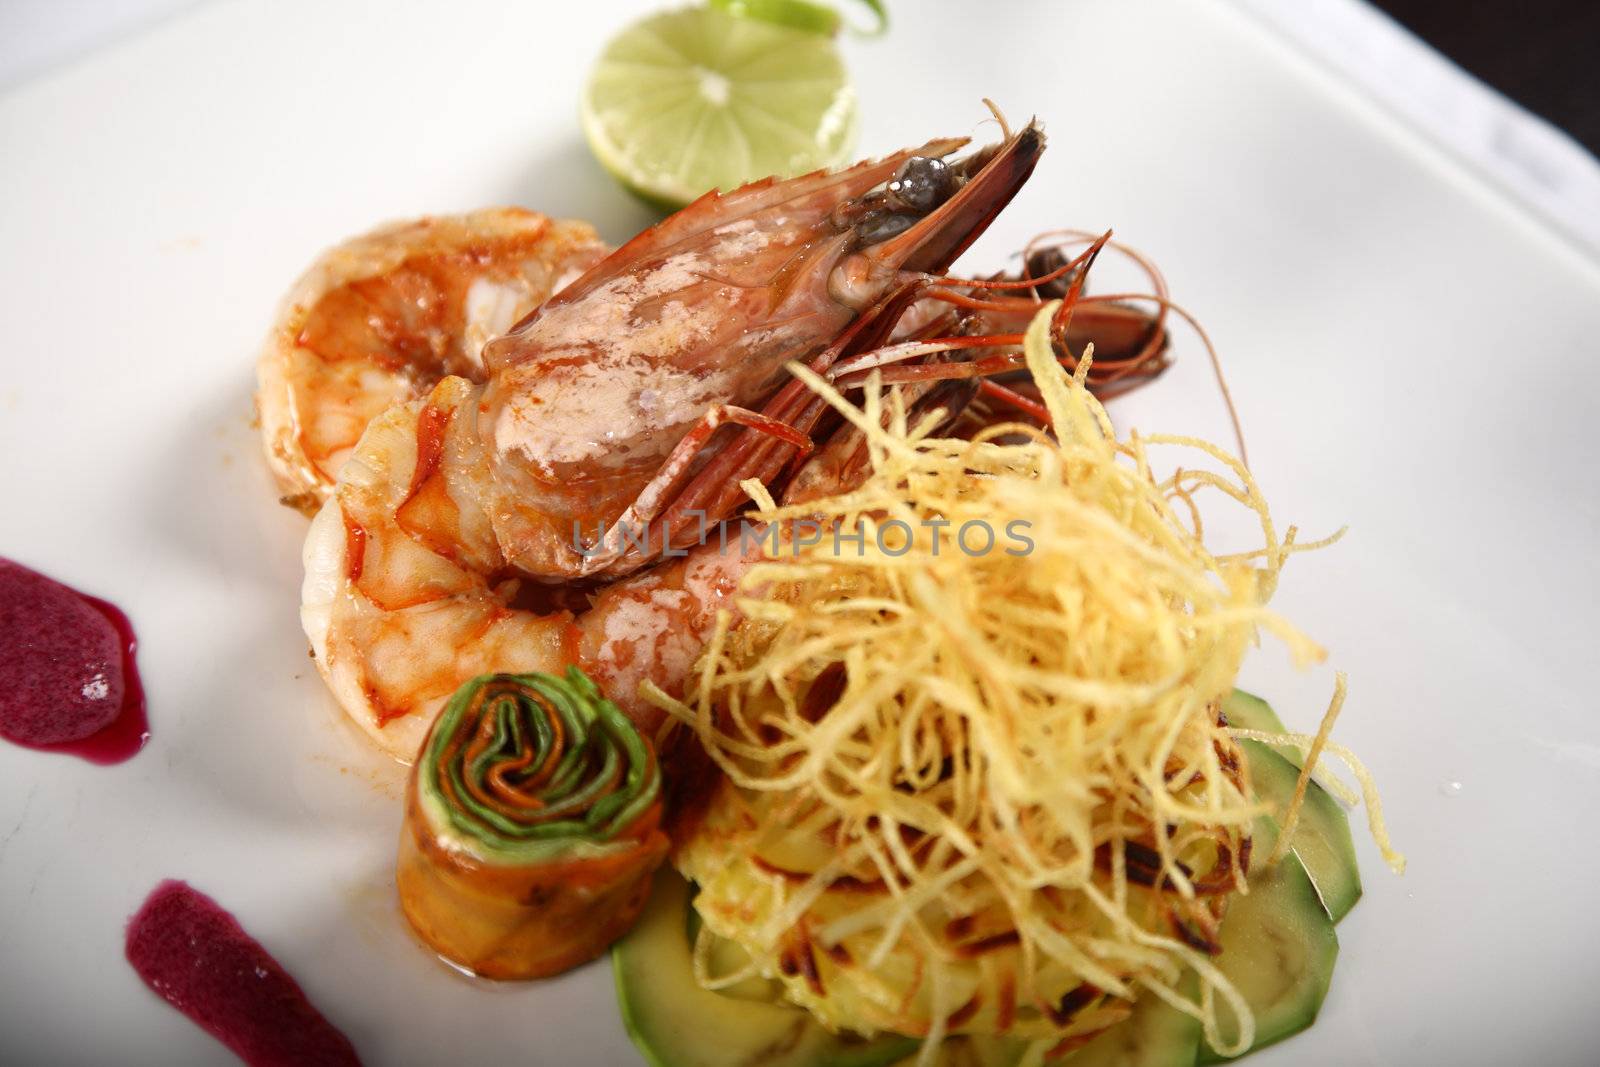 Royal tiger shrimps in classy service by shamtor